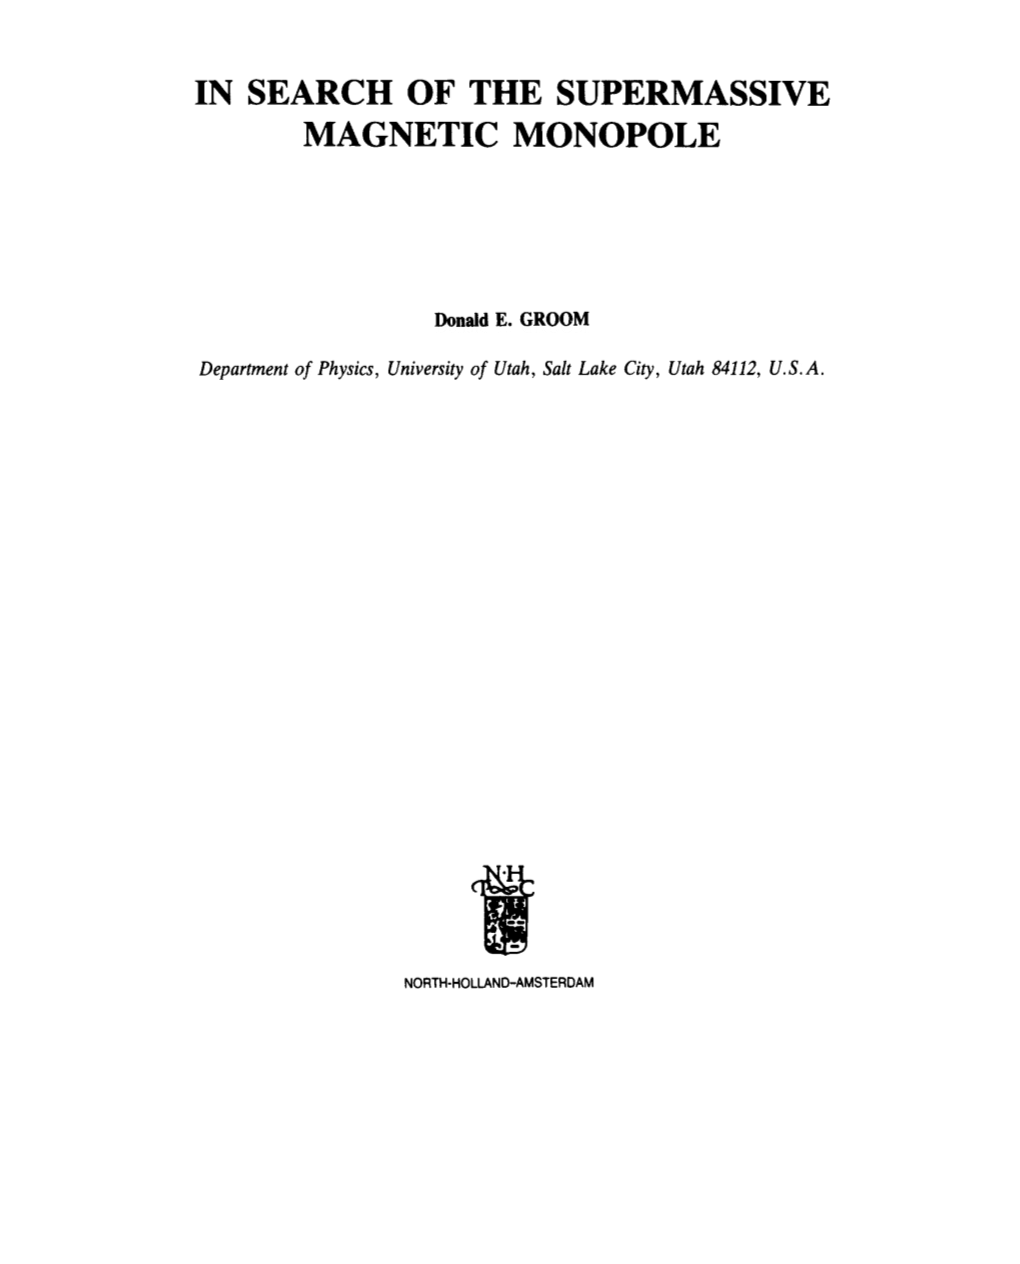 In Search of the Supermassive Magnetic Monopole